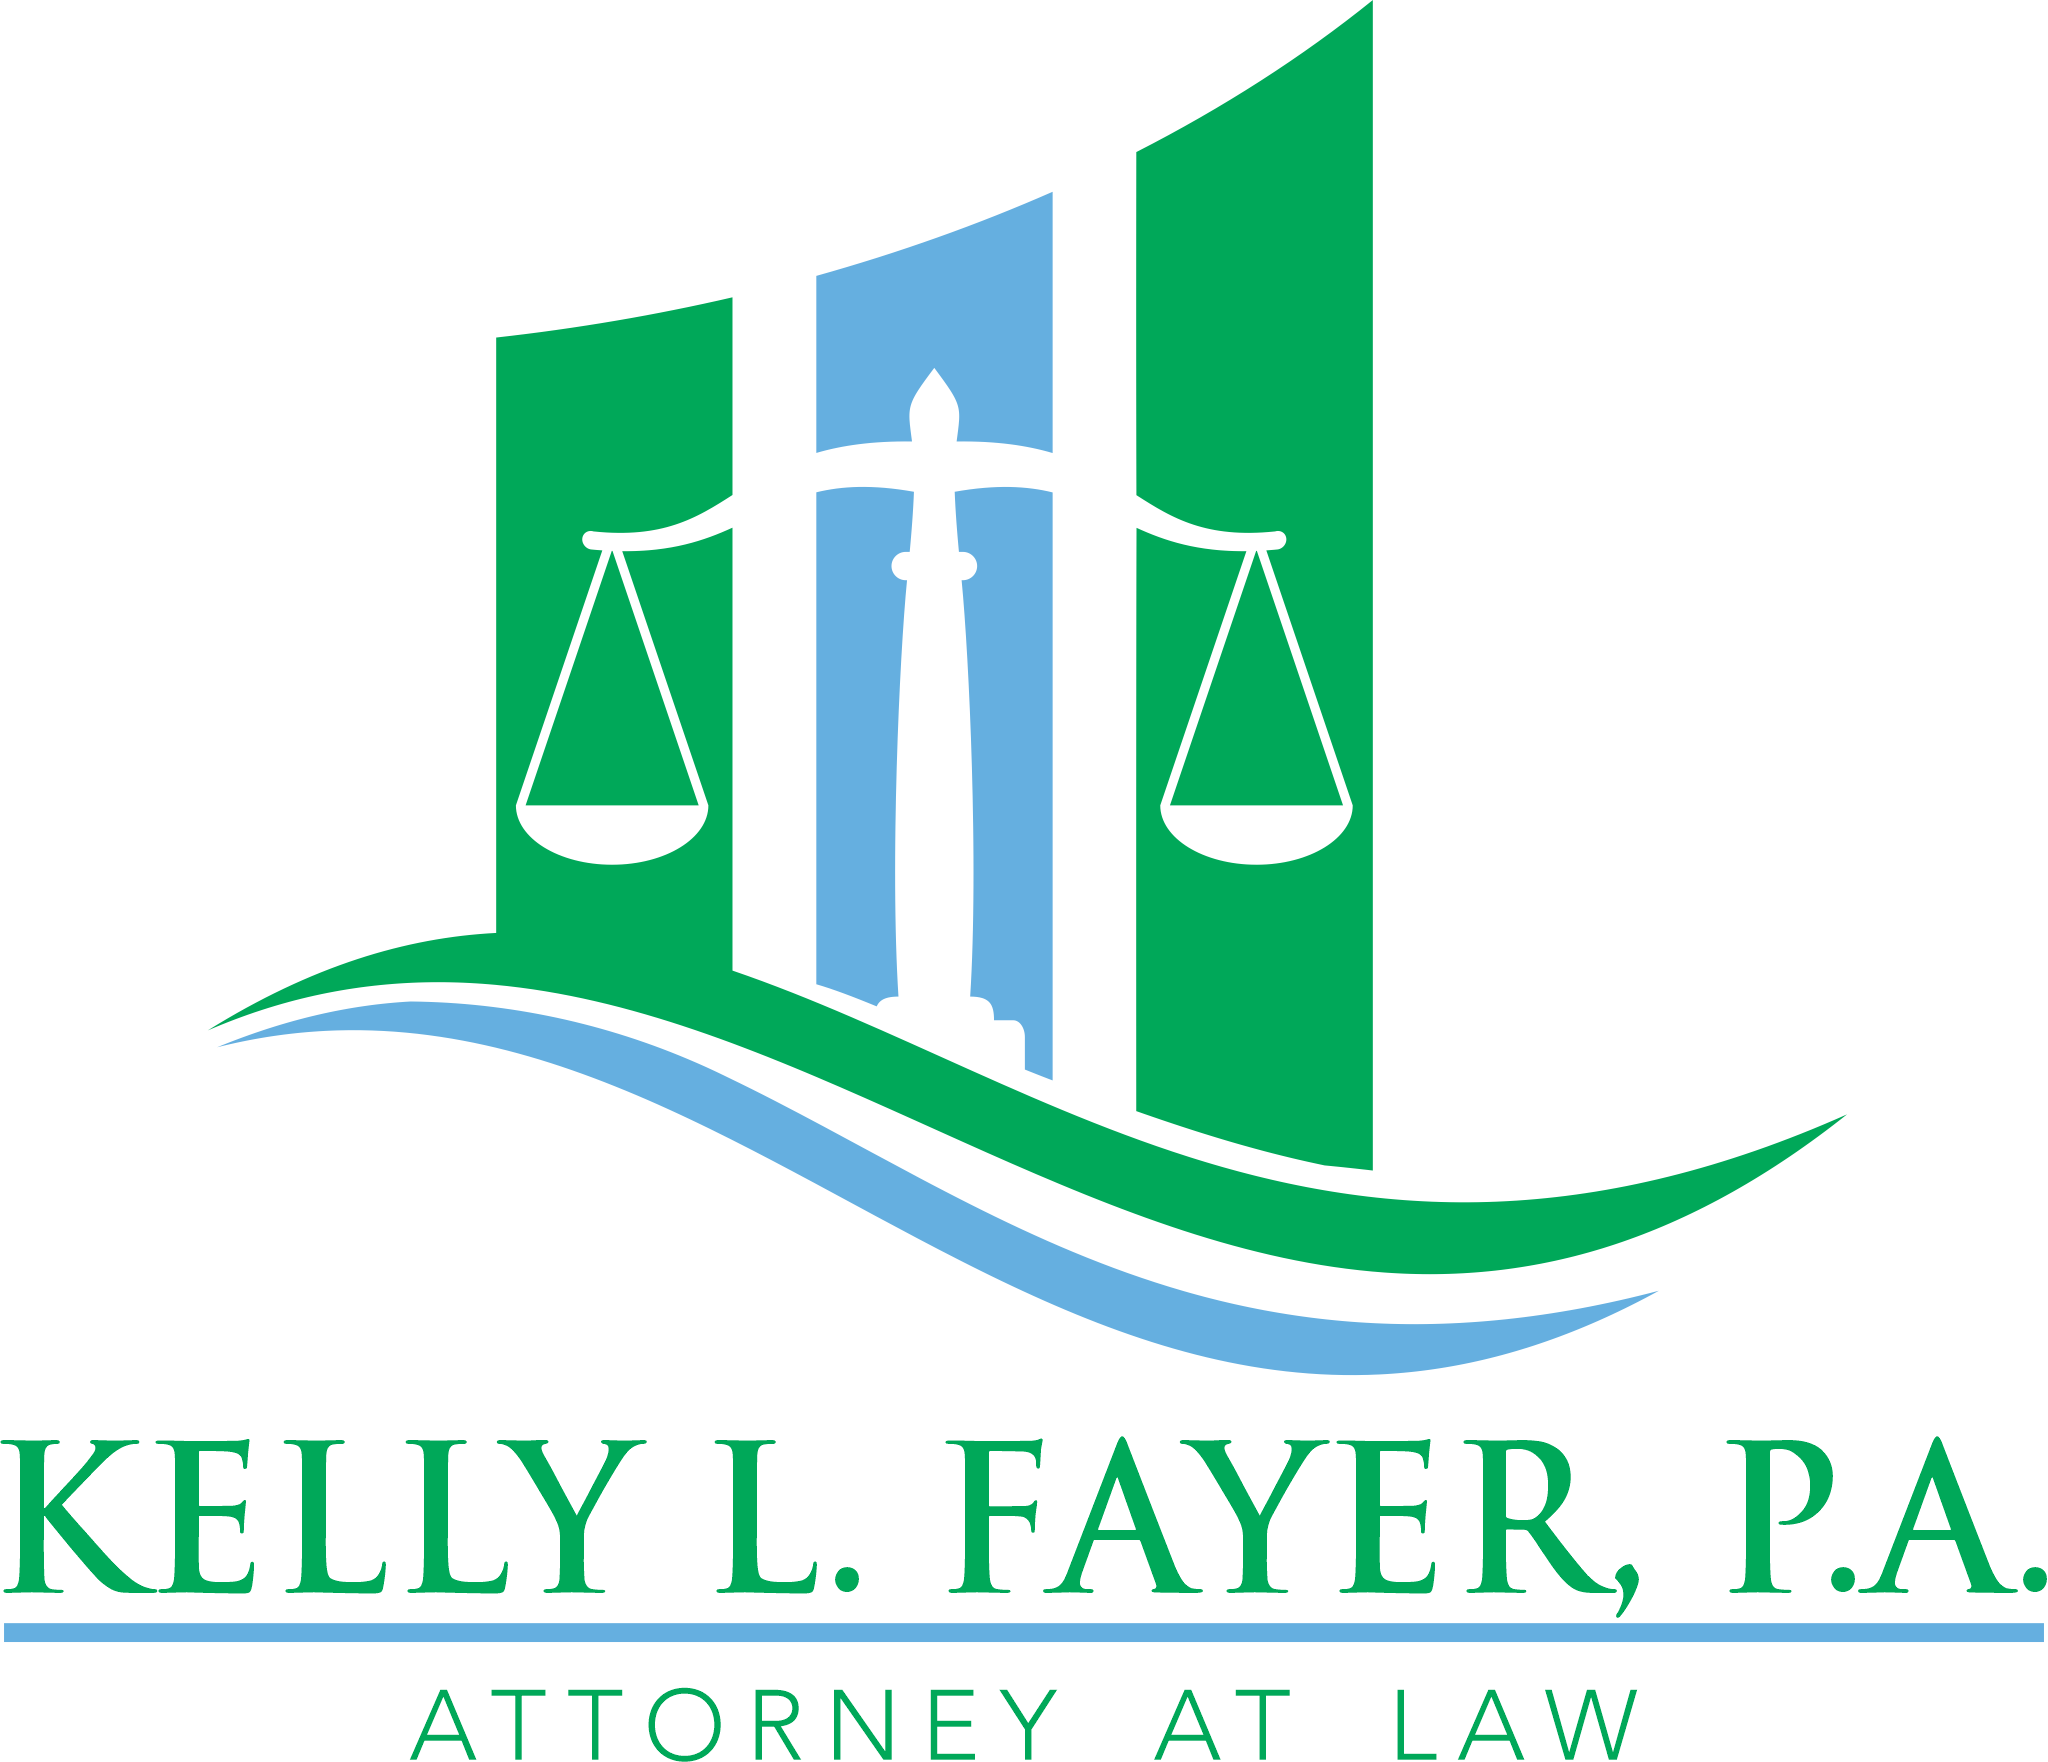 c. Kelly L. Fayer, P.A Law (Select)